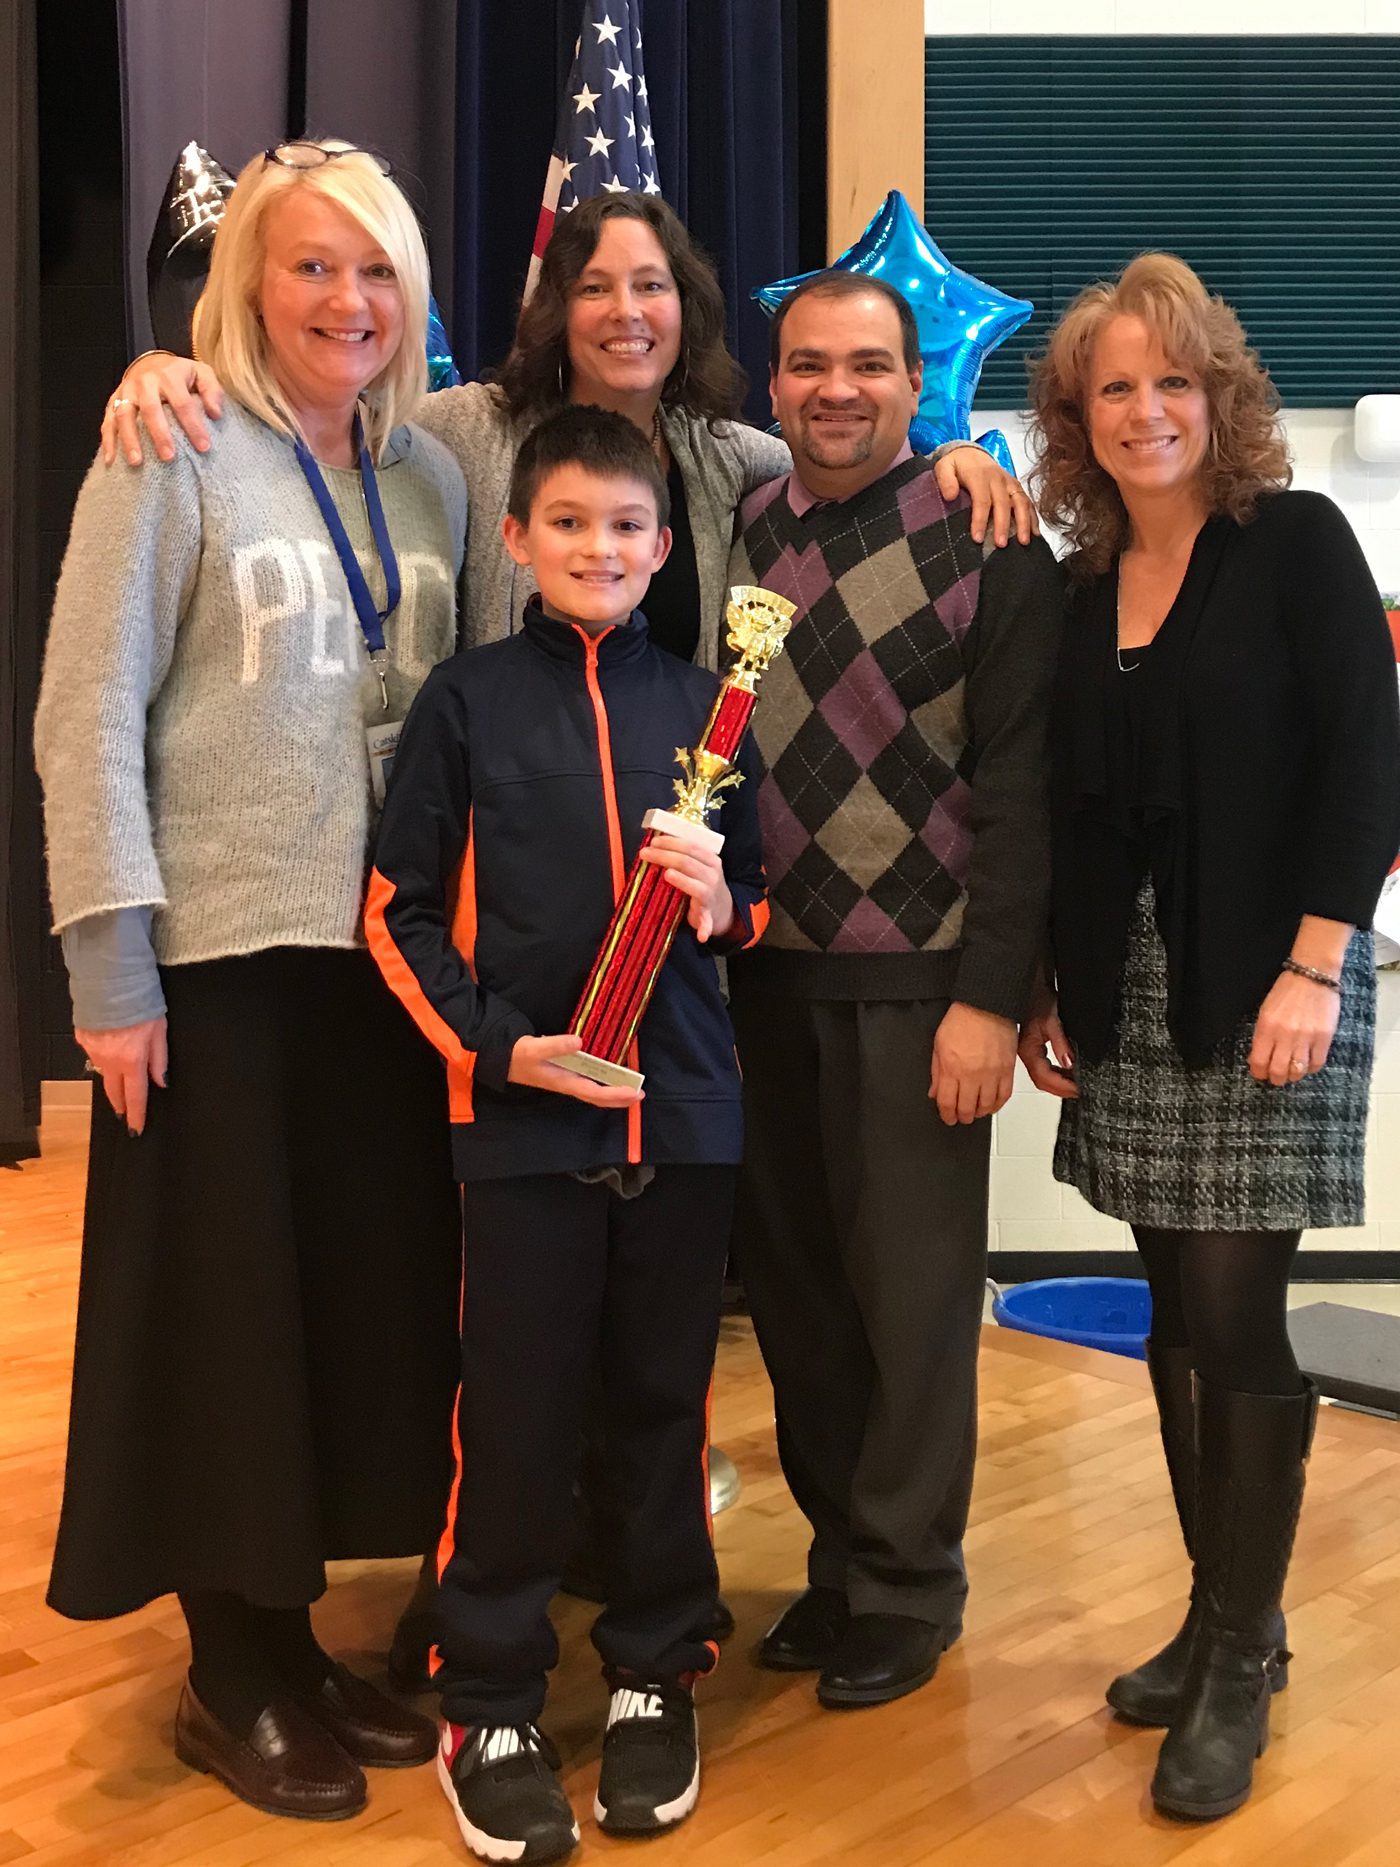 CES Spelling Bee Champion Billy McMullen is joined by (left to right) Mrs. Lisa Schlenker, Catskill Elementary School Assistant Principal, and Catskill Elementary School teachers and Spelling Bee Committee members Mrs. Alexandra Standish, Mr. Matthew Luvera, Mrs. Heather Schindler.